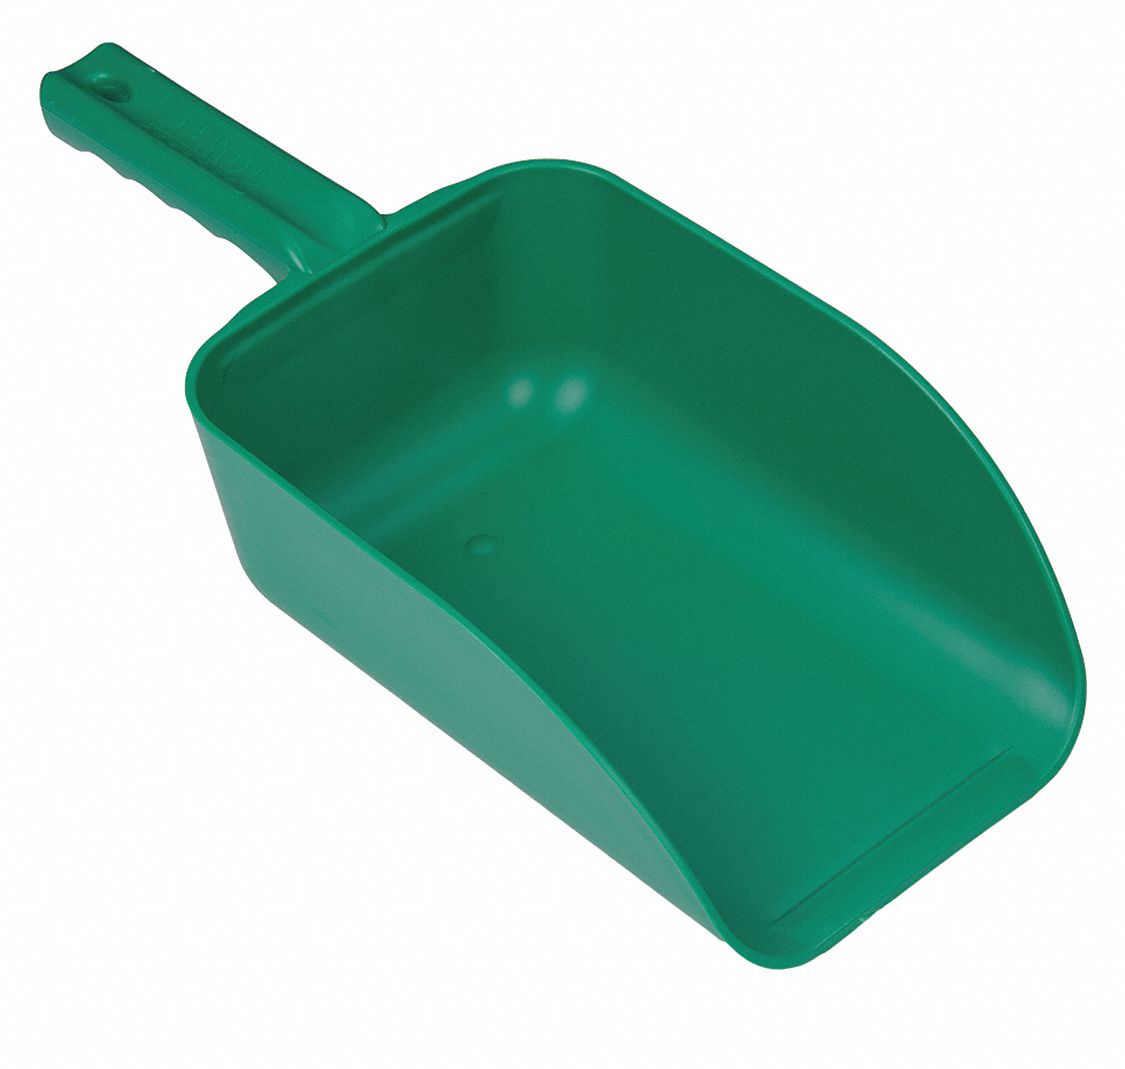 3UE71 - E0612 Large Hand Scoop Green 15 x 6-1/2 In